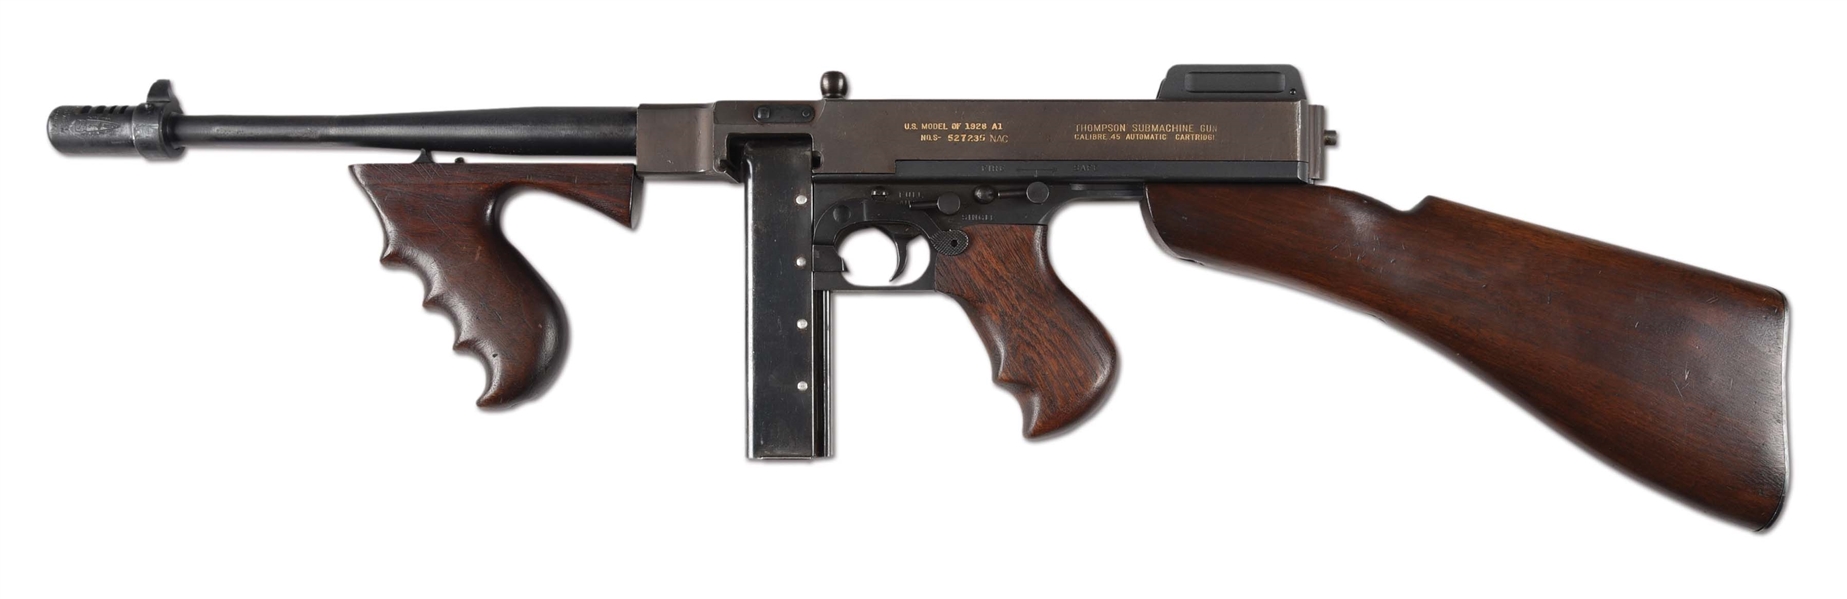 (N) ATTRACTIVE SAVAGE MANUFACTURED 1928A1 MACHINE GUN AS REFURBRISHED AND REGISTERED BY NUMRICH ARMS CORP (CURIO & RELIC). 